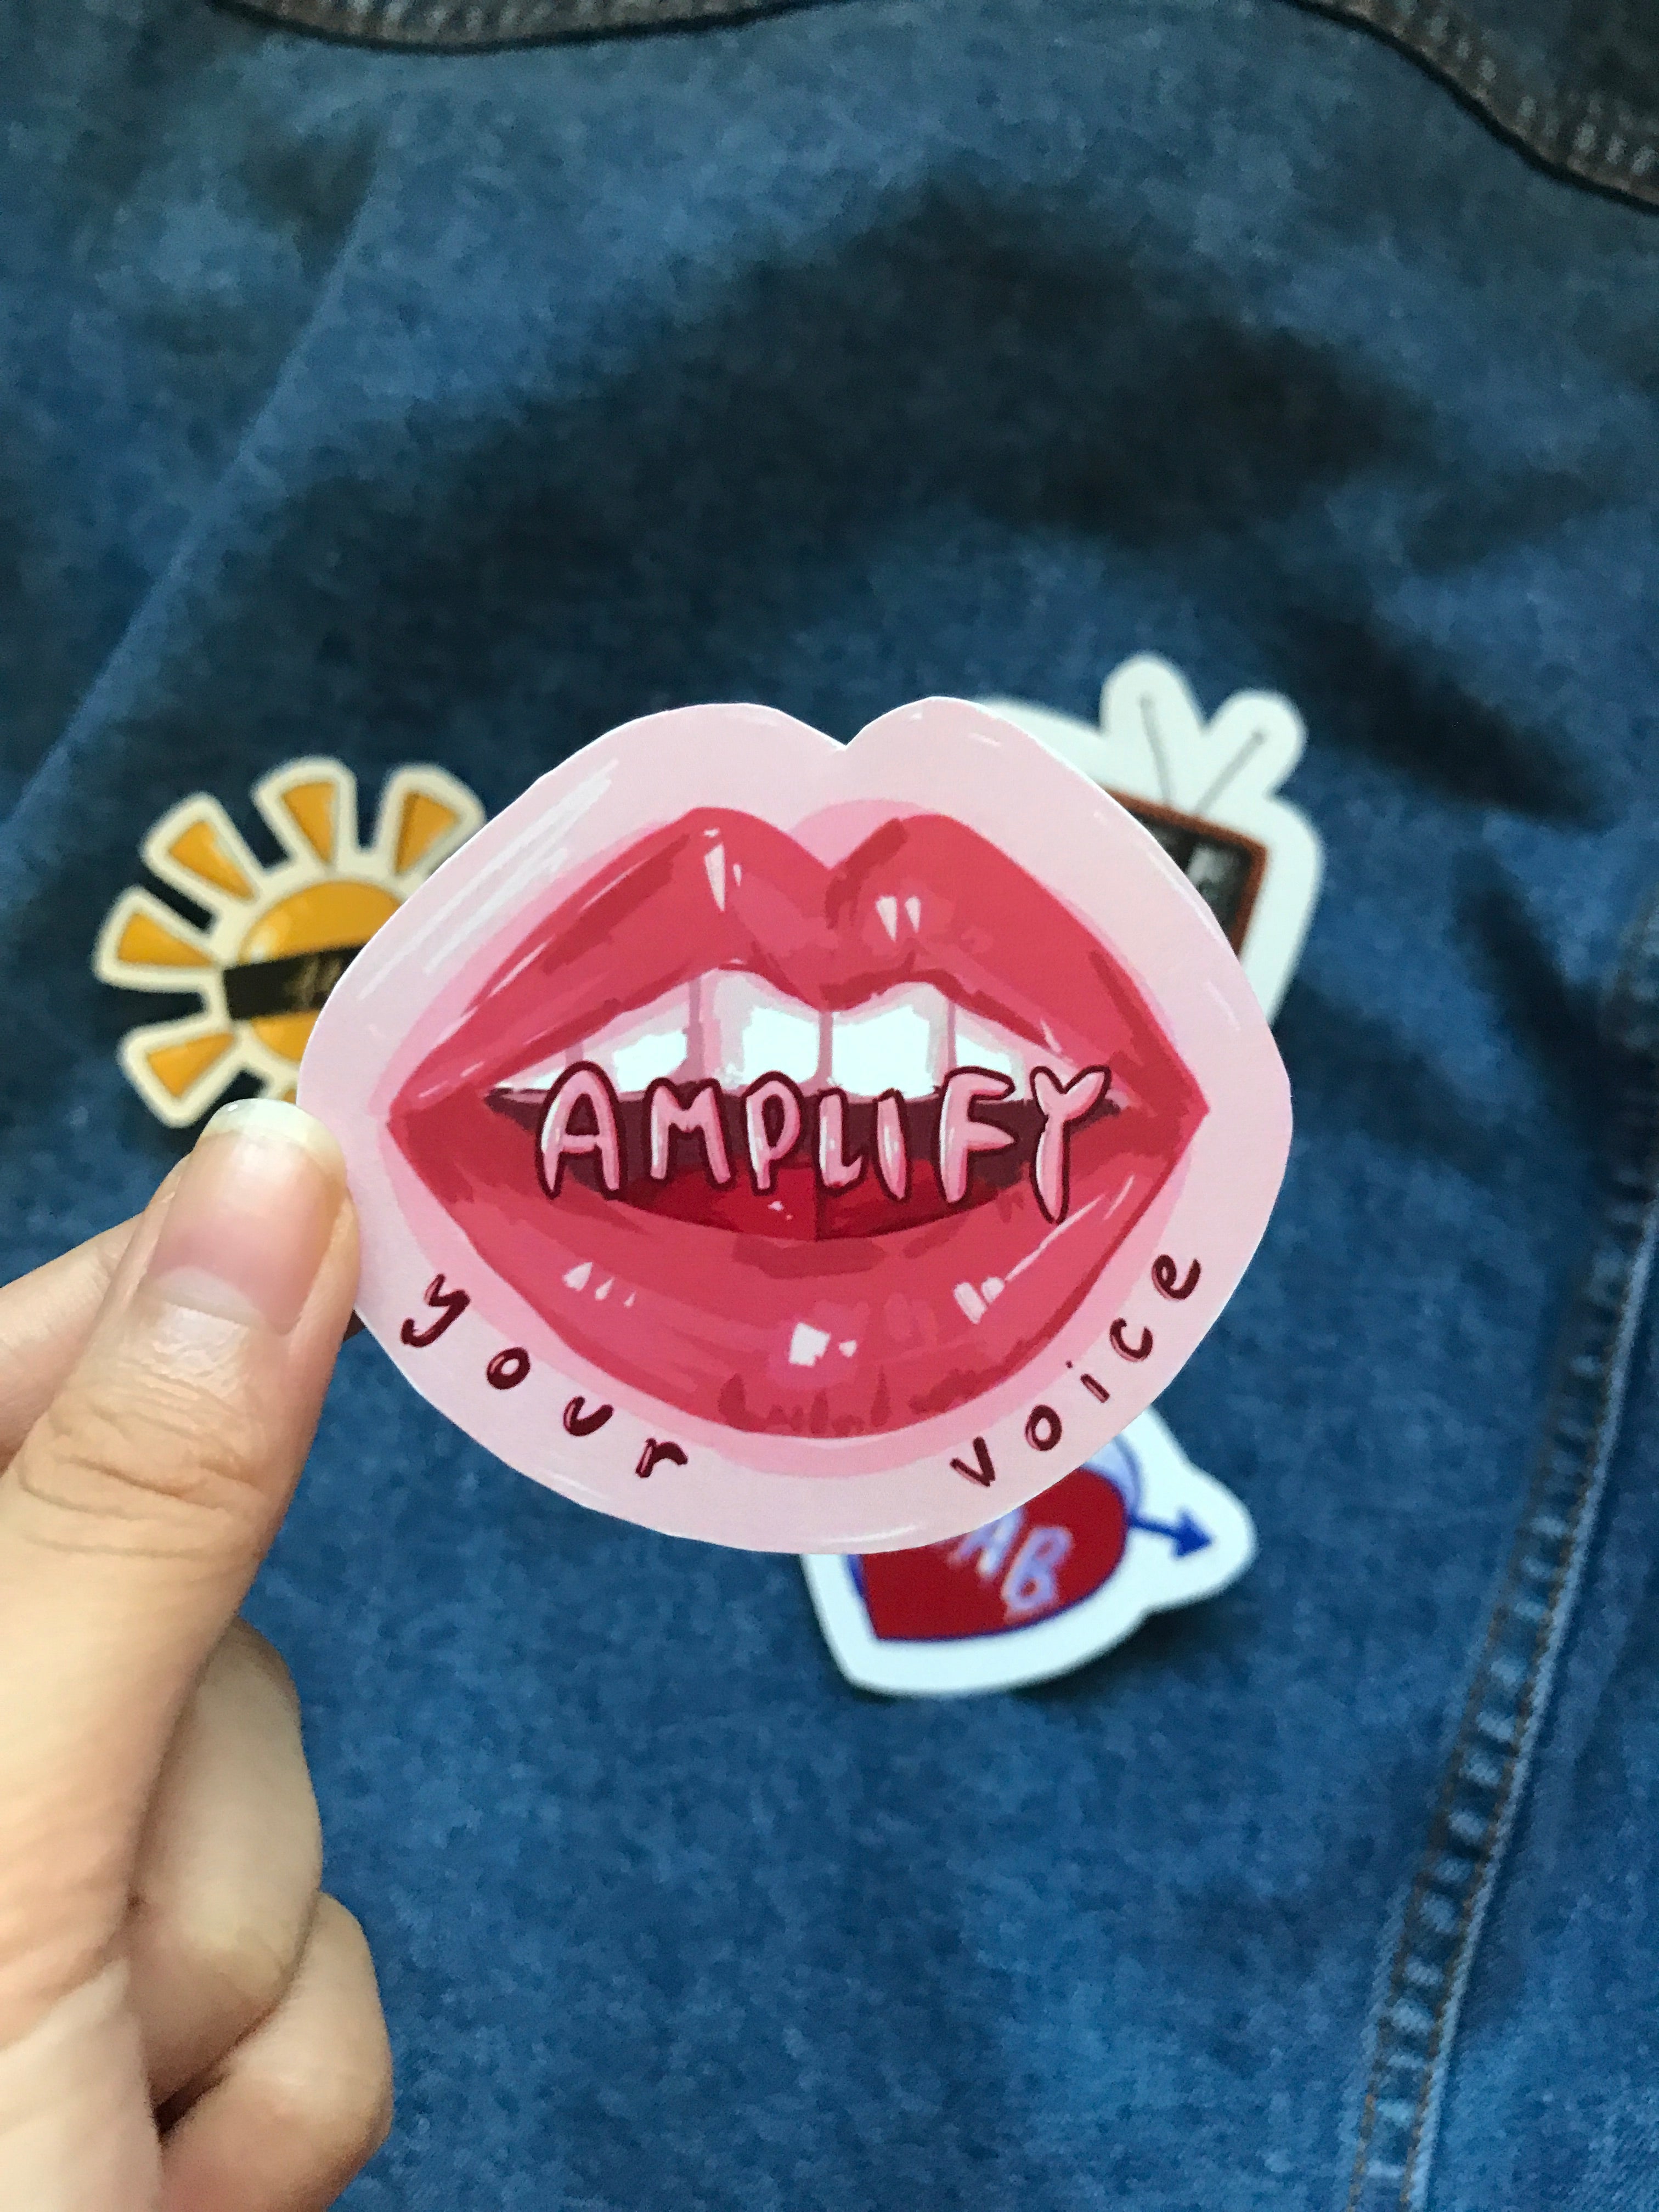 "Amplify Your Voice" lips sticker